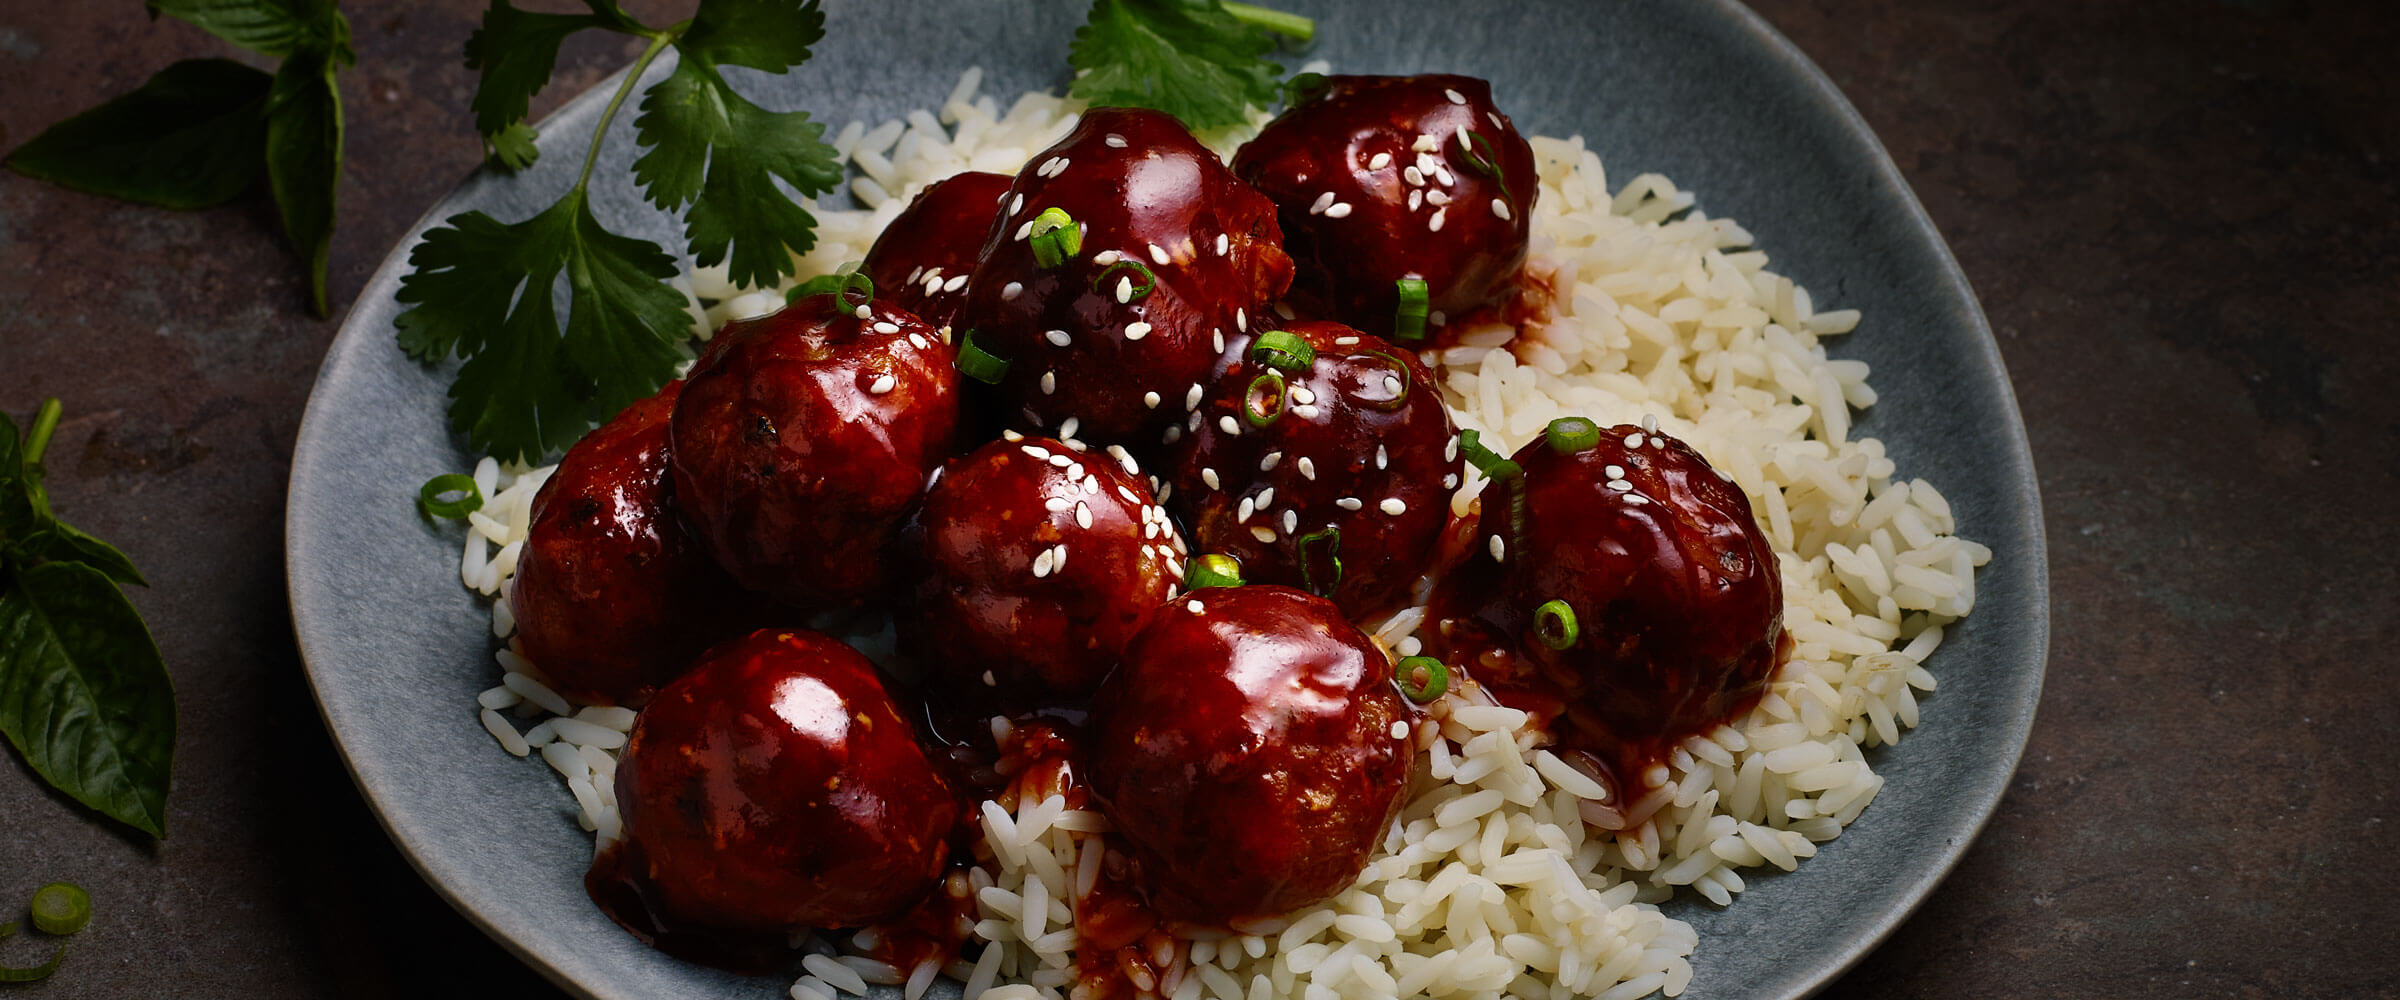 Easy Sweet and Spicy Meatballs over rice on blue plate with garnish